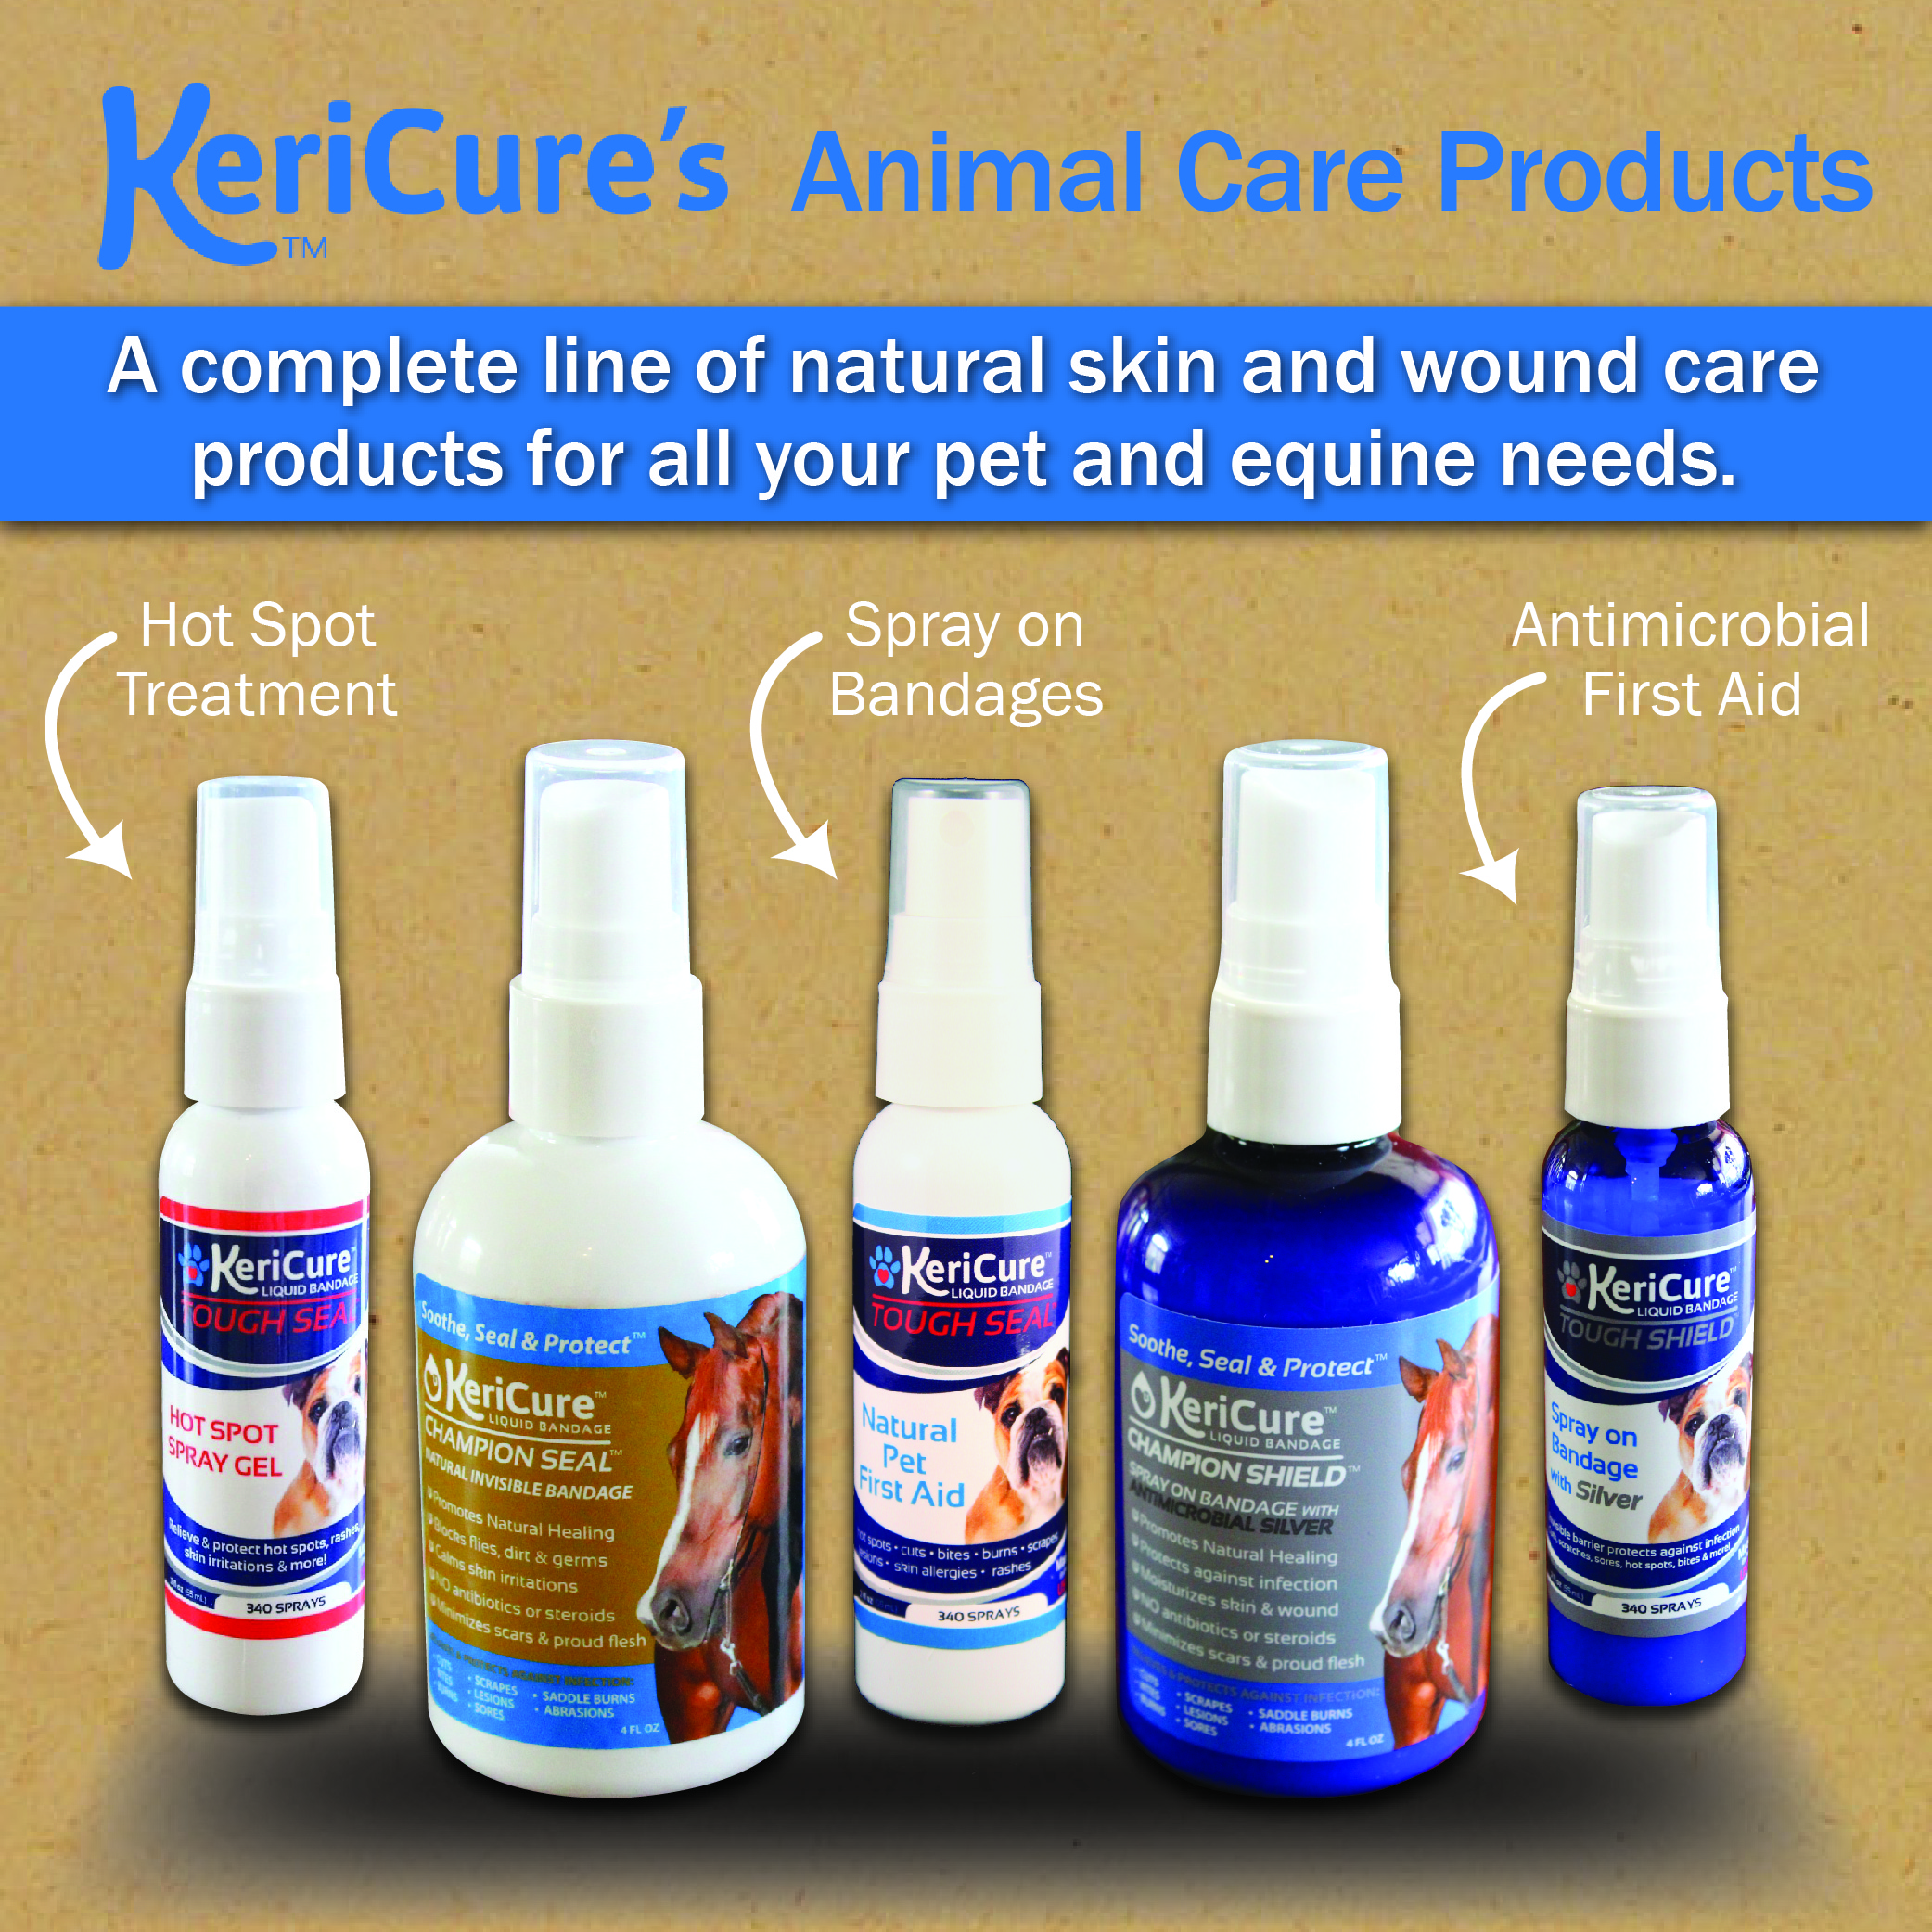 KeriCure's Wound Care Products